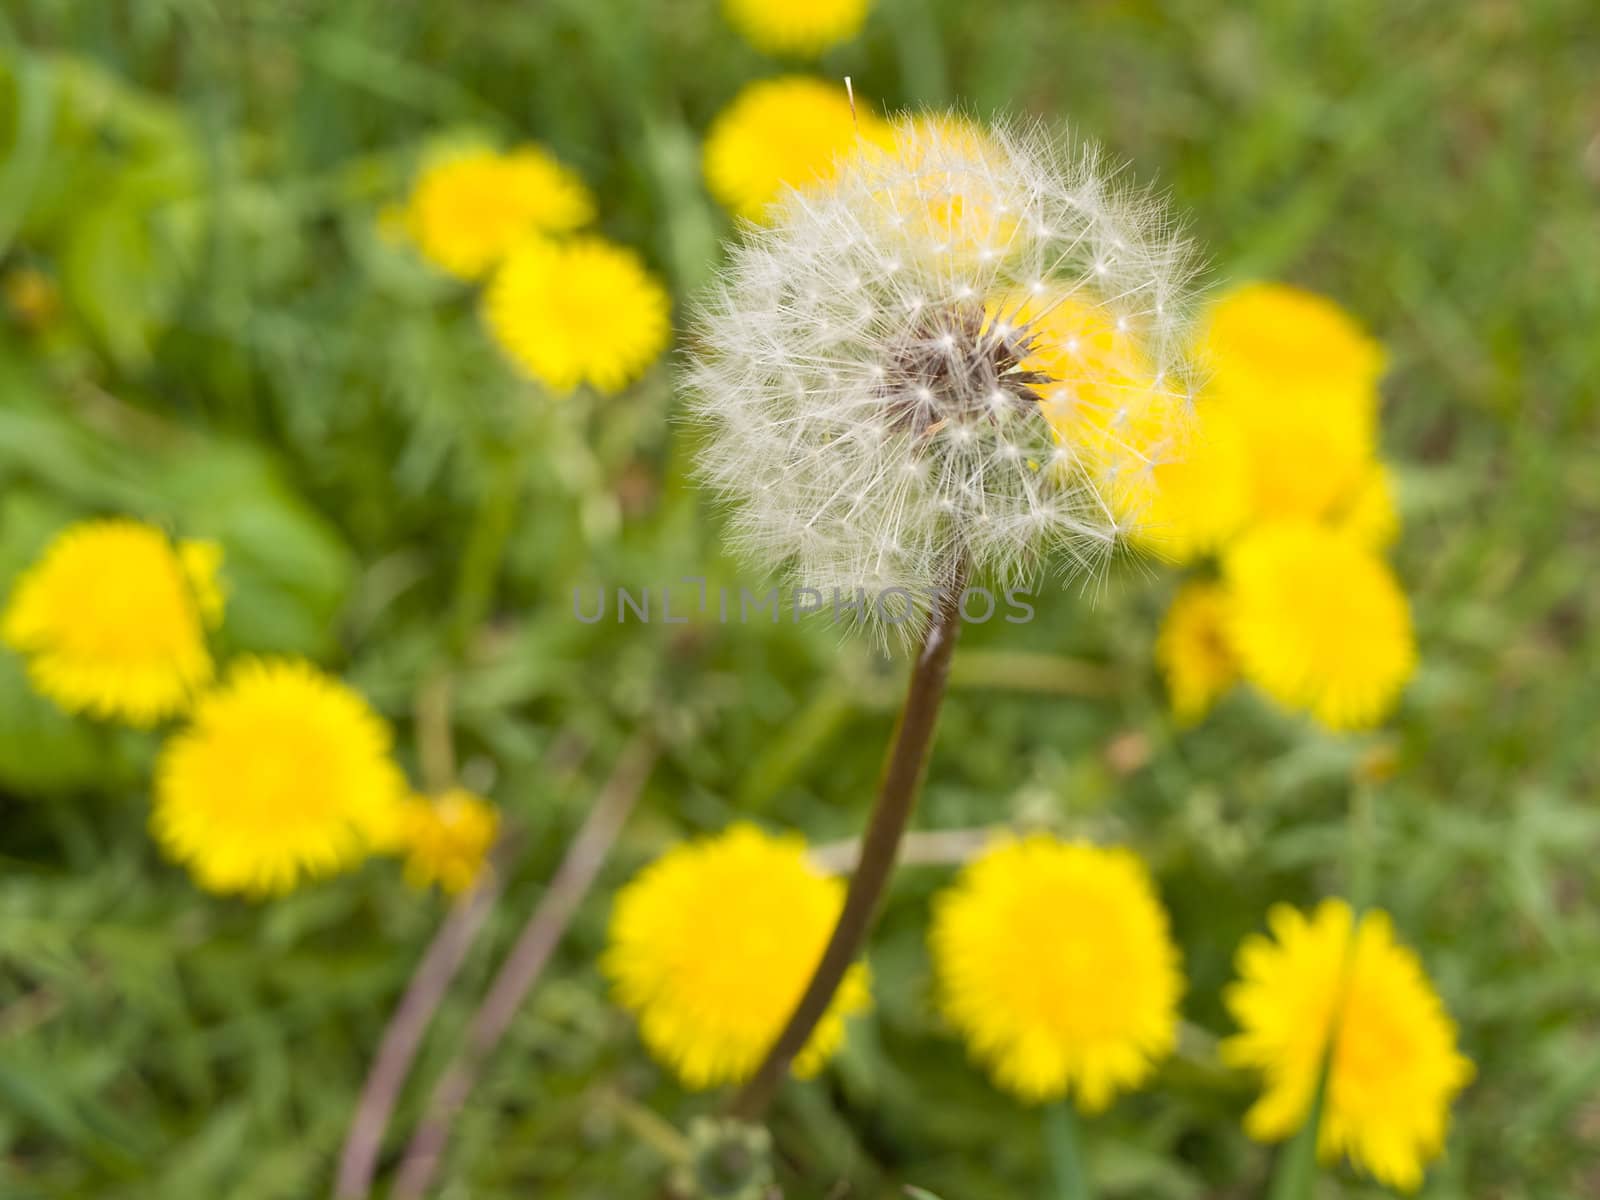 White spring dandelion at the green grass and yellow dandelions